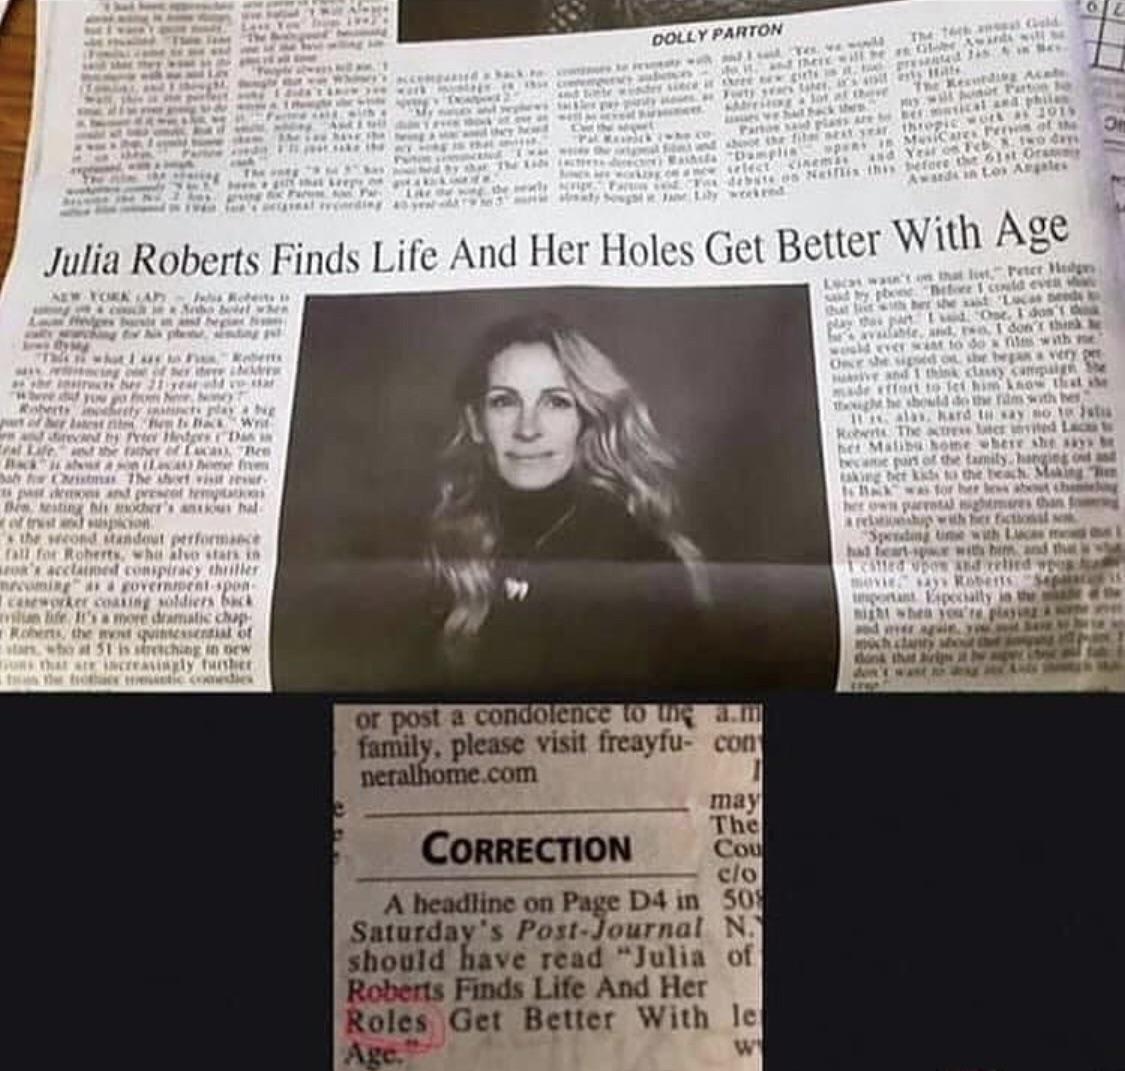 To write an article.